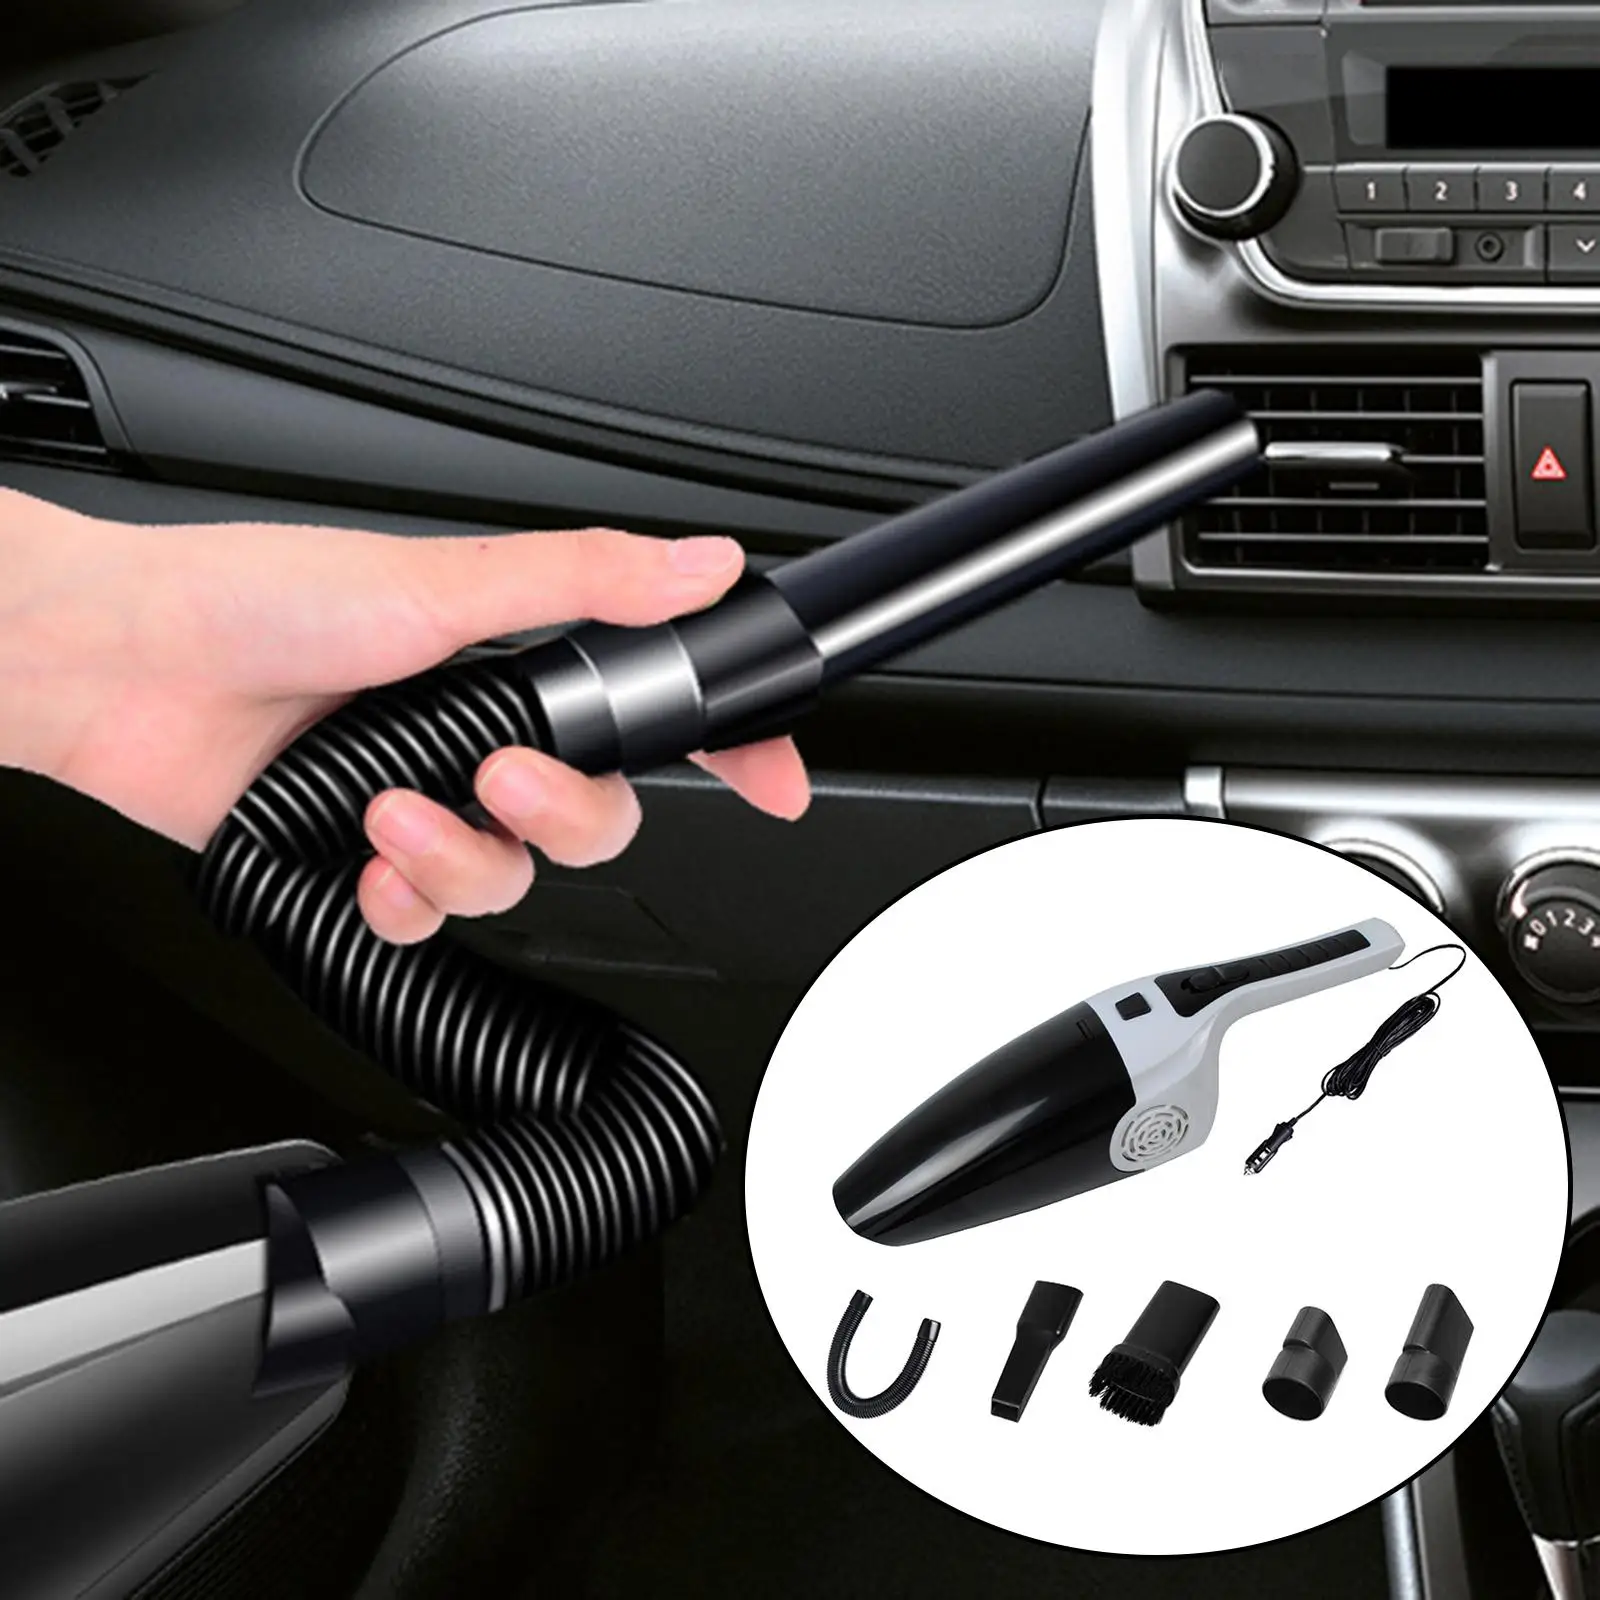 12V Wired Car Vacuum Cleaner Mini with 5 Attachments Corded Lightweight Strong Suction High Power 120W Handheld Portable